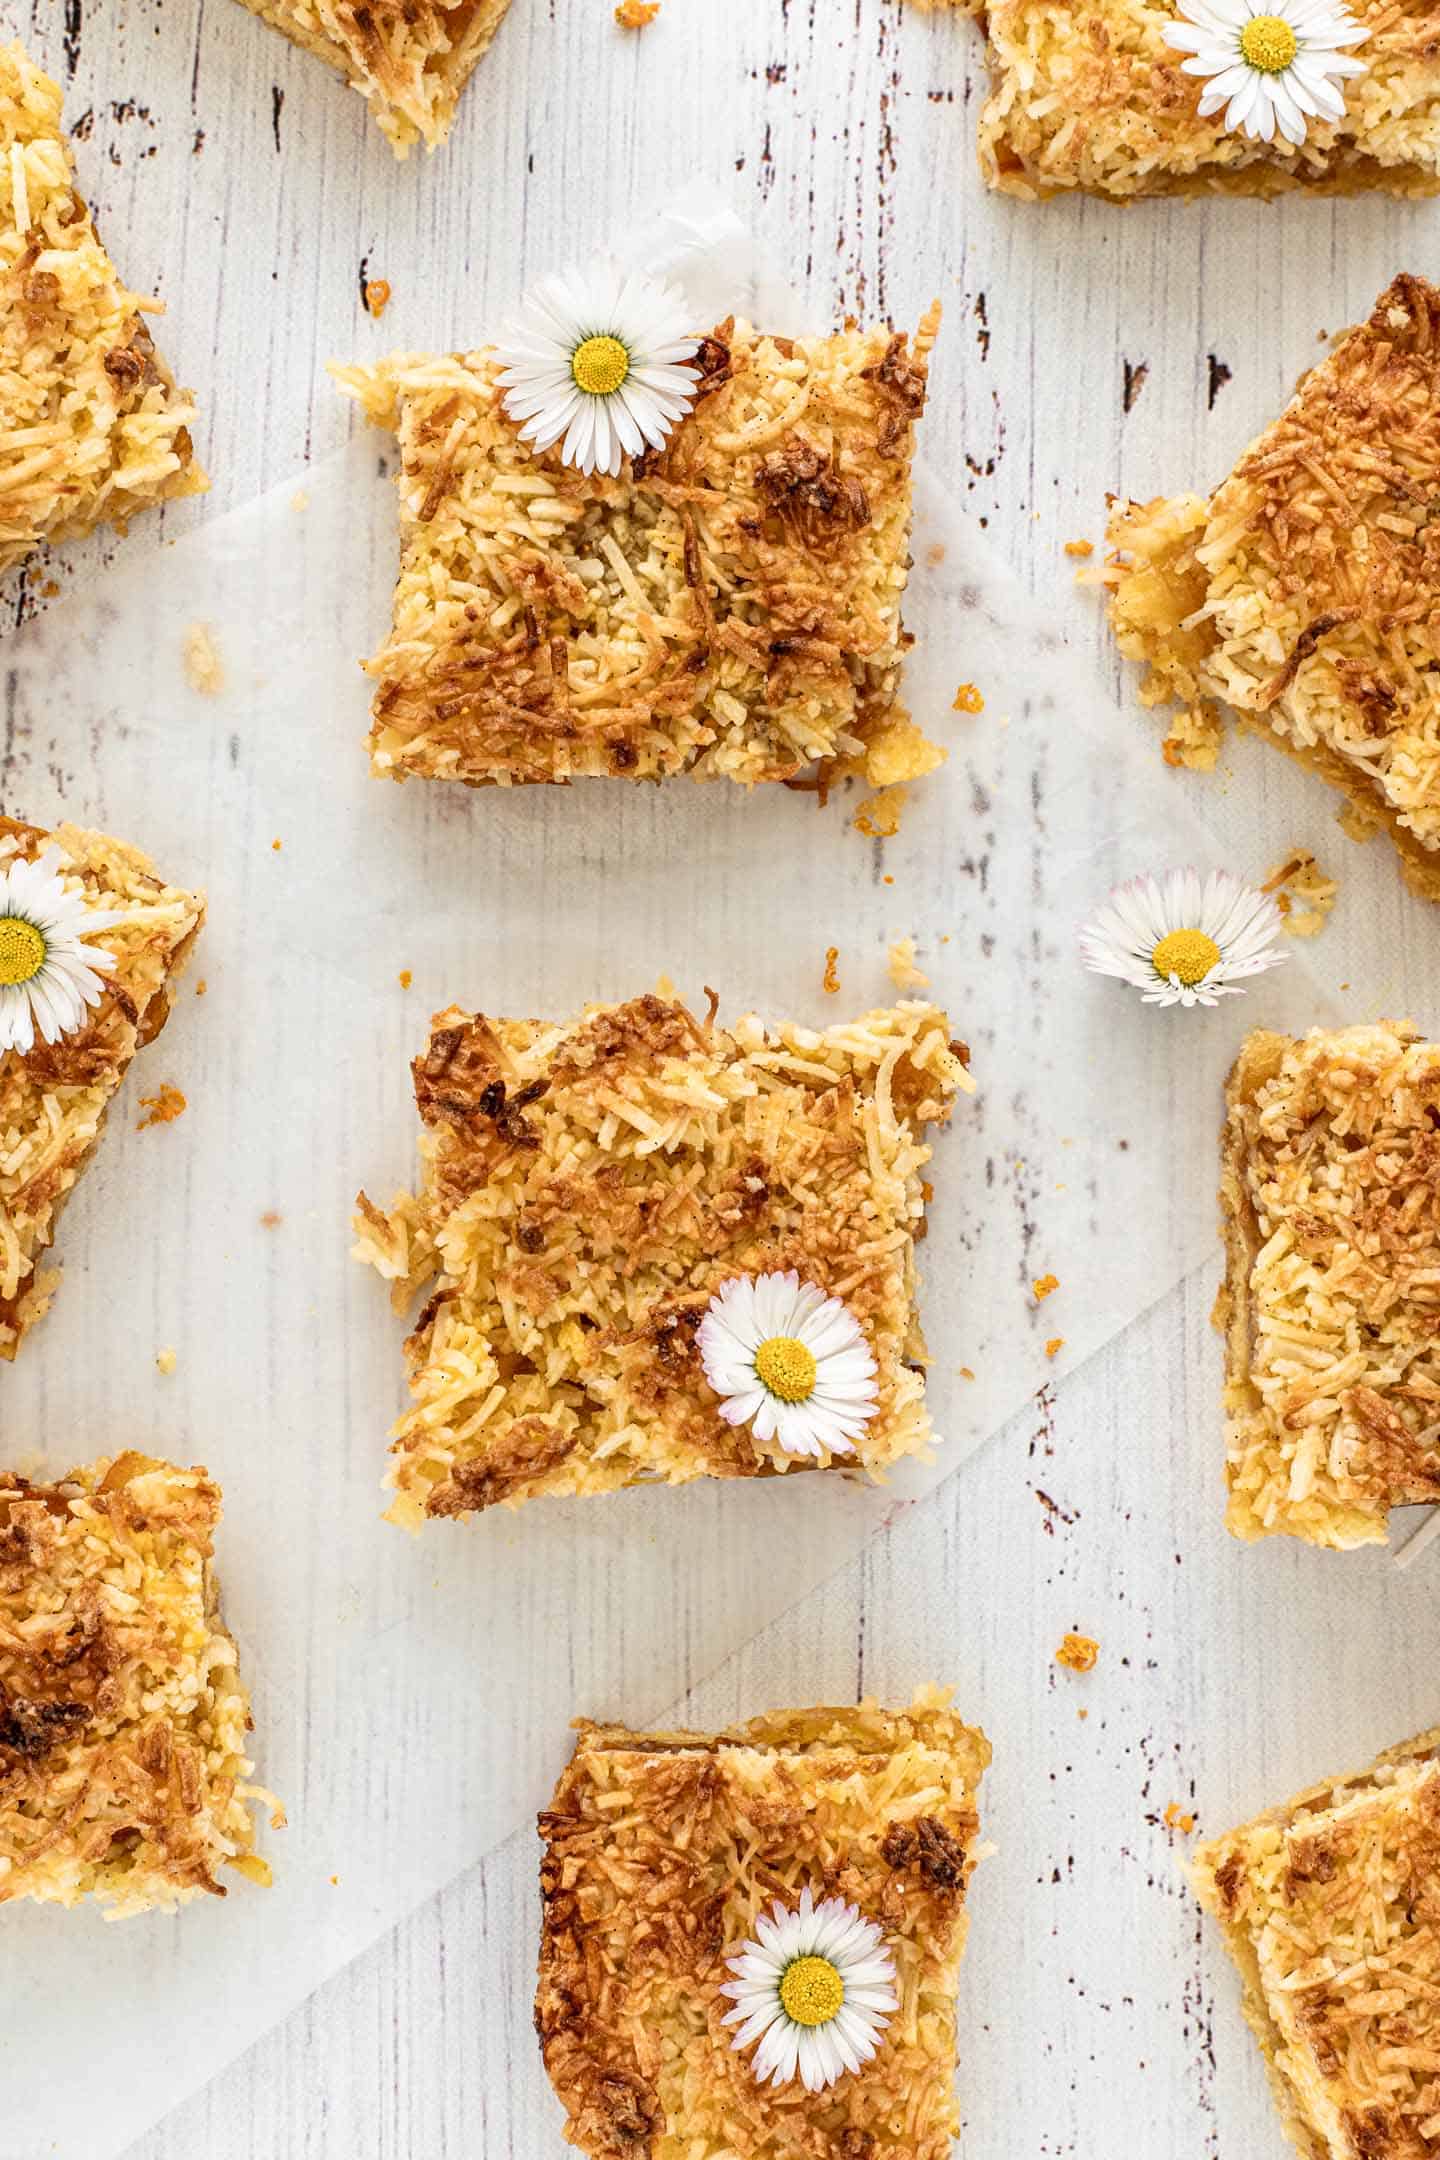 Overhead shot of square bars of coconut and orange marmalade tart with little daisies on top